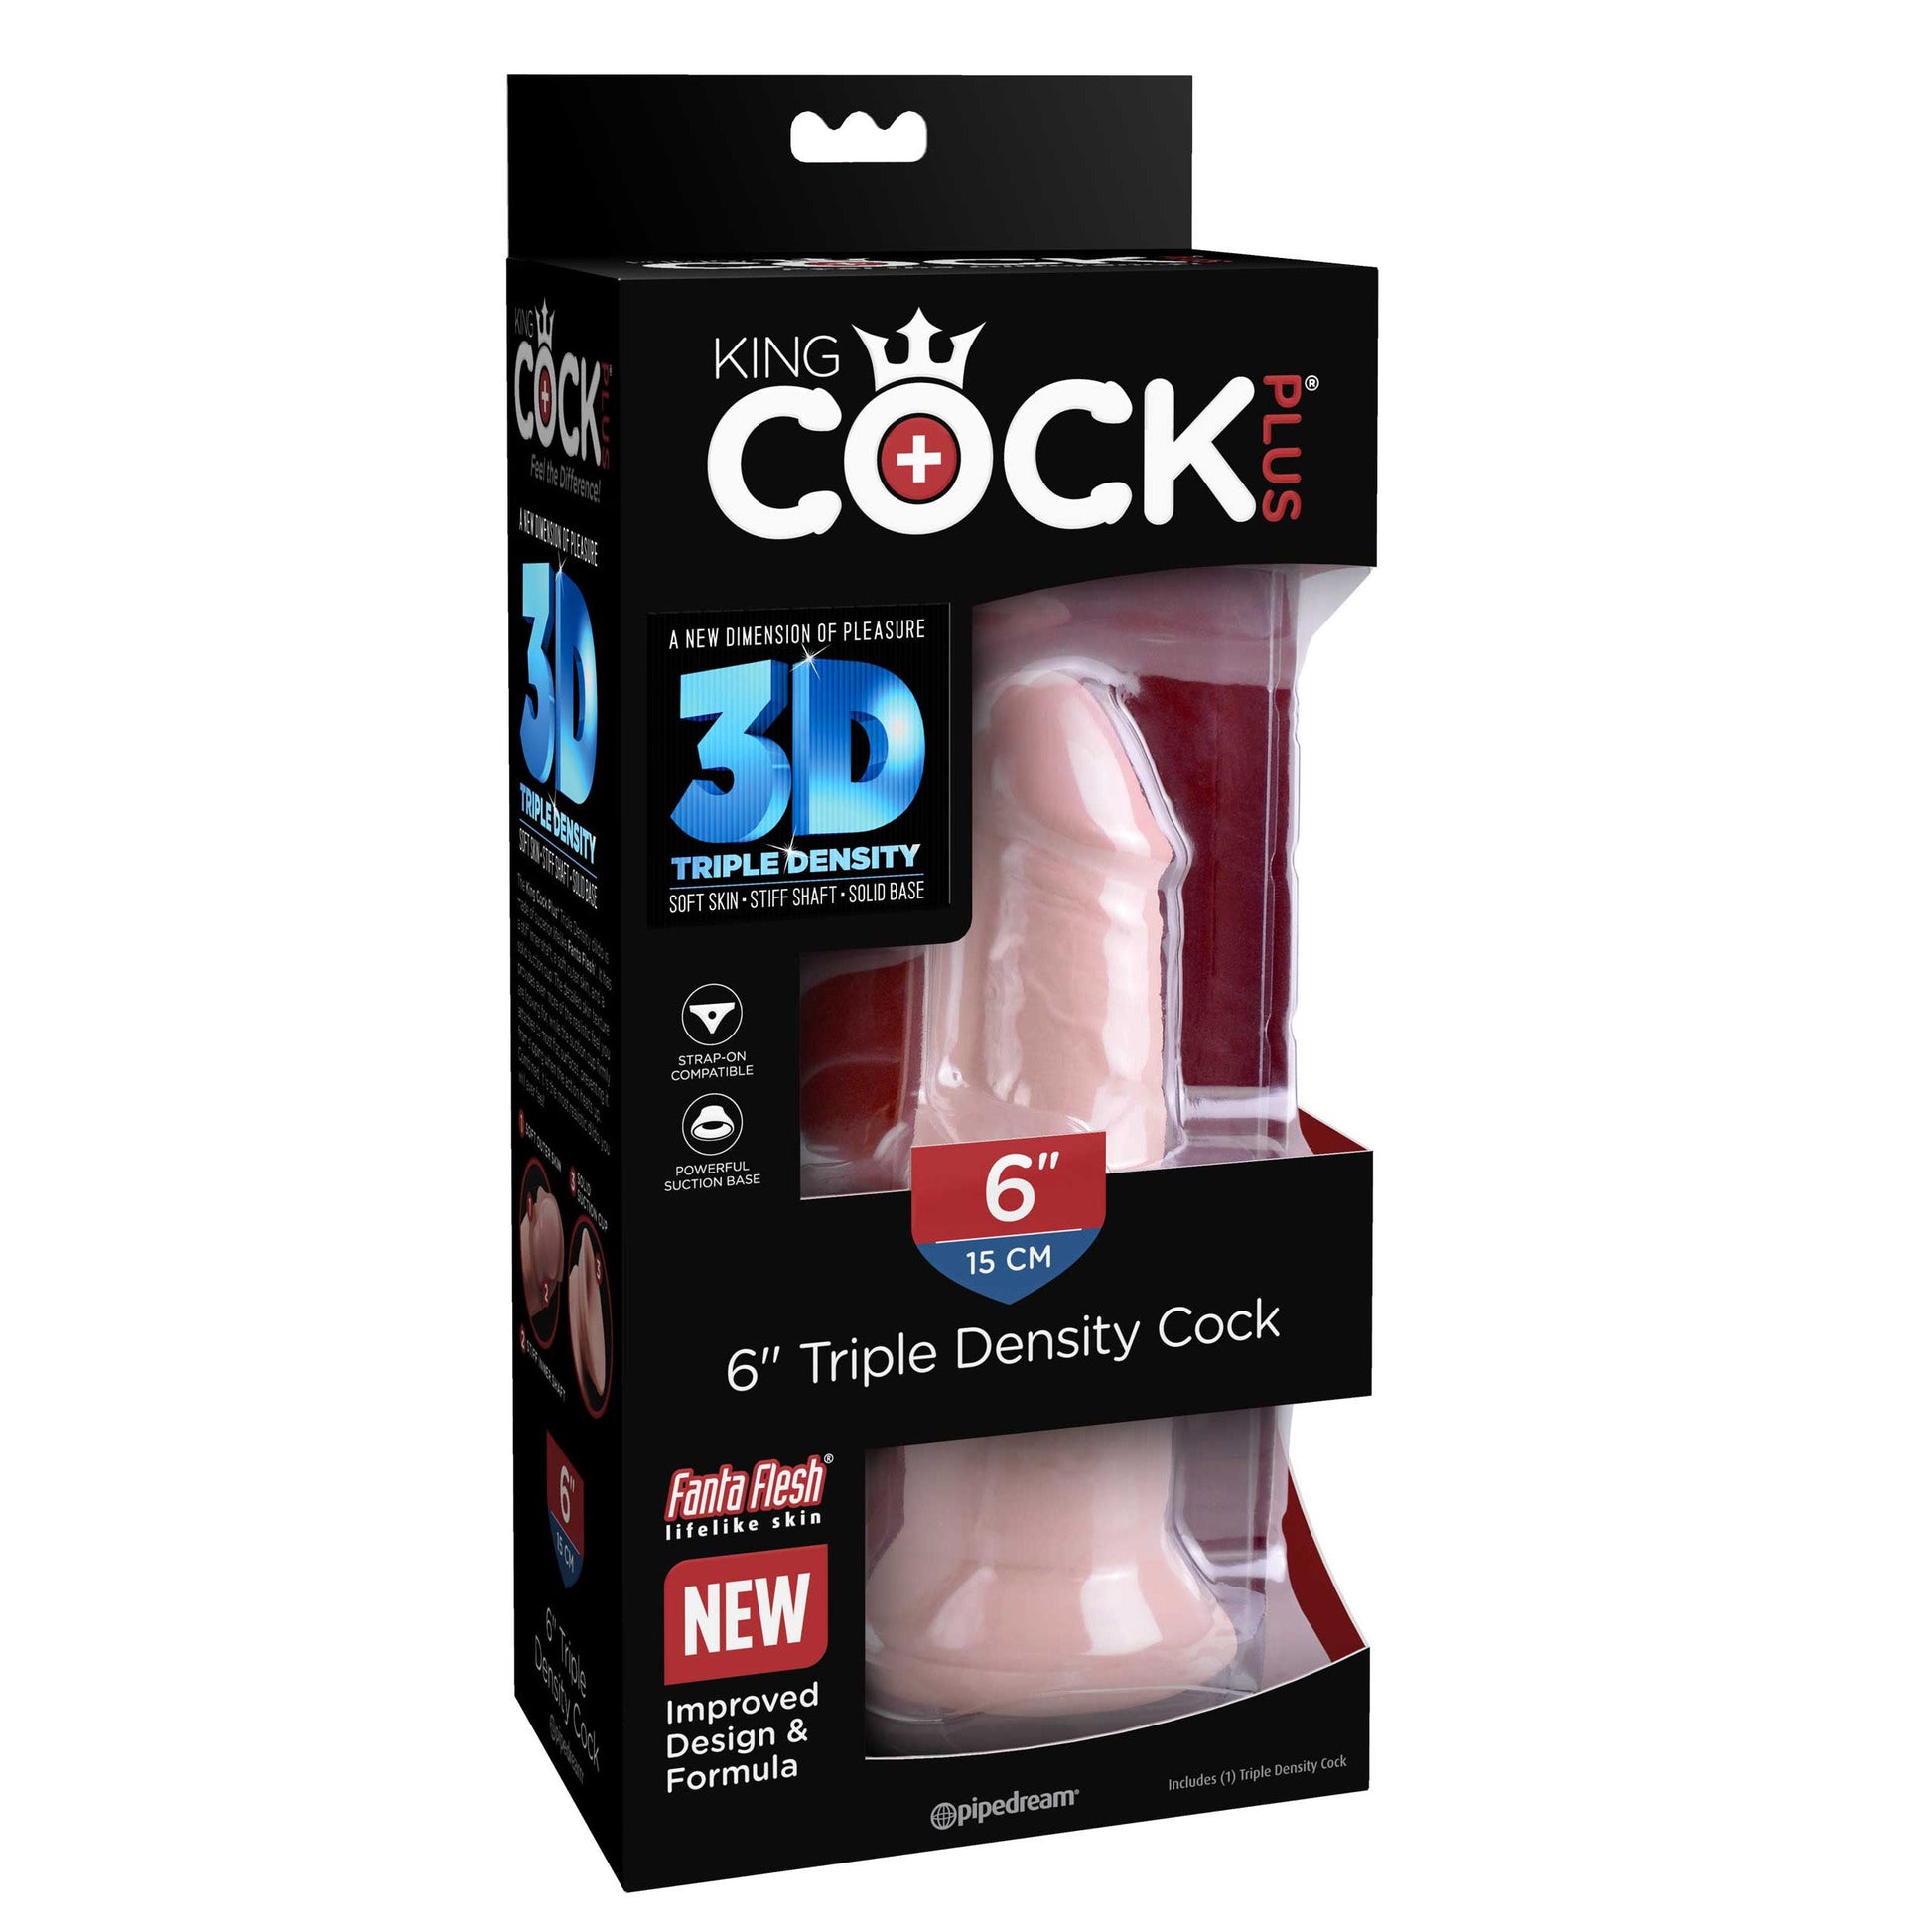 King Cock Plus 6" Triple Density Cock - Light - Thorn & Feather Sex Toy Canada